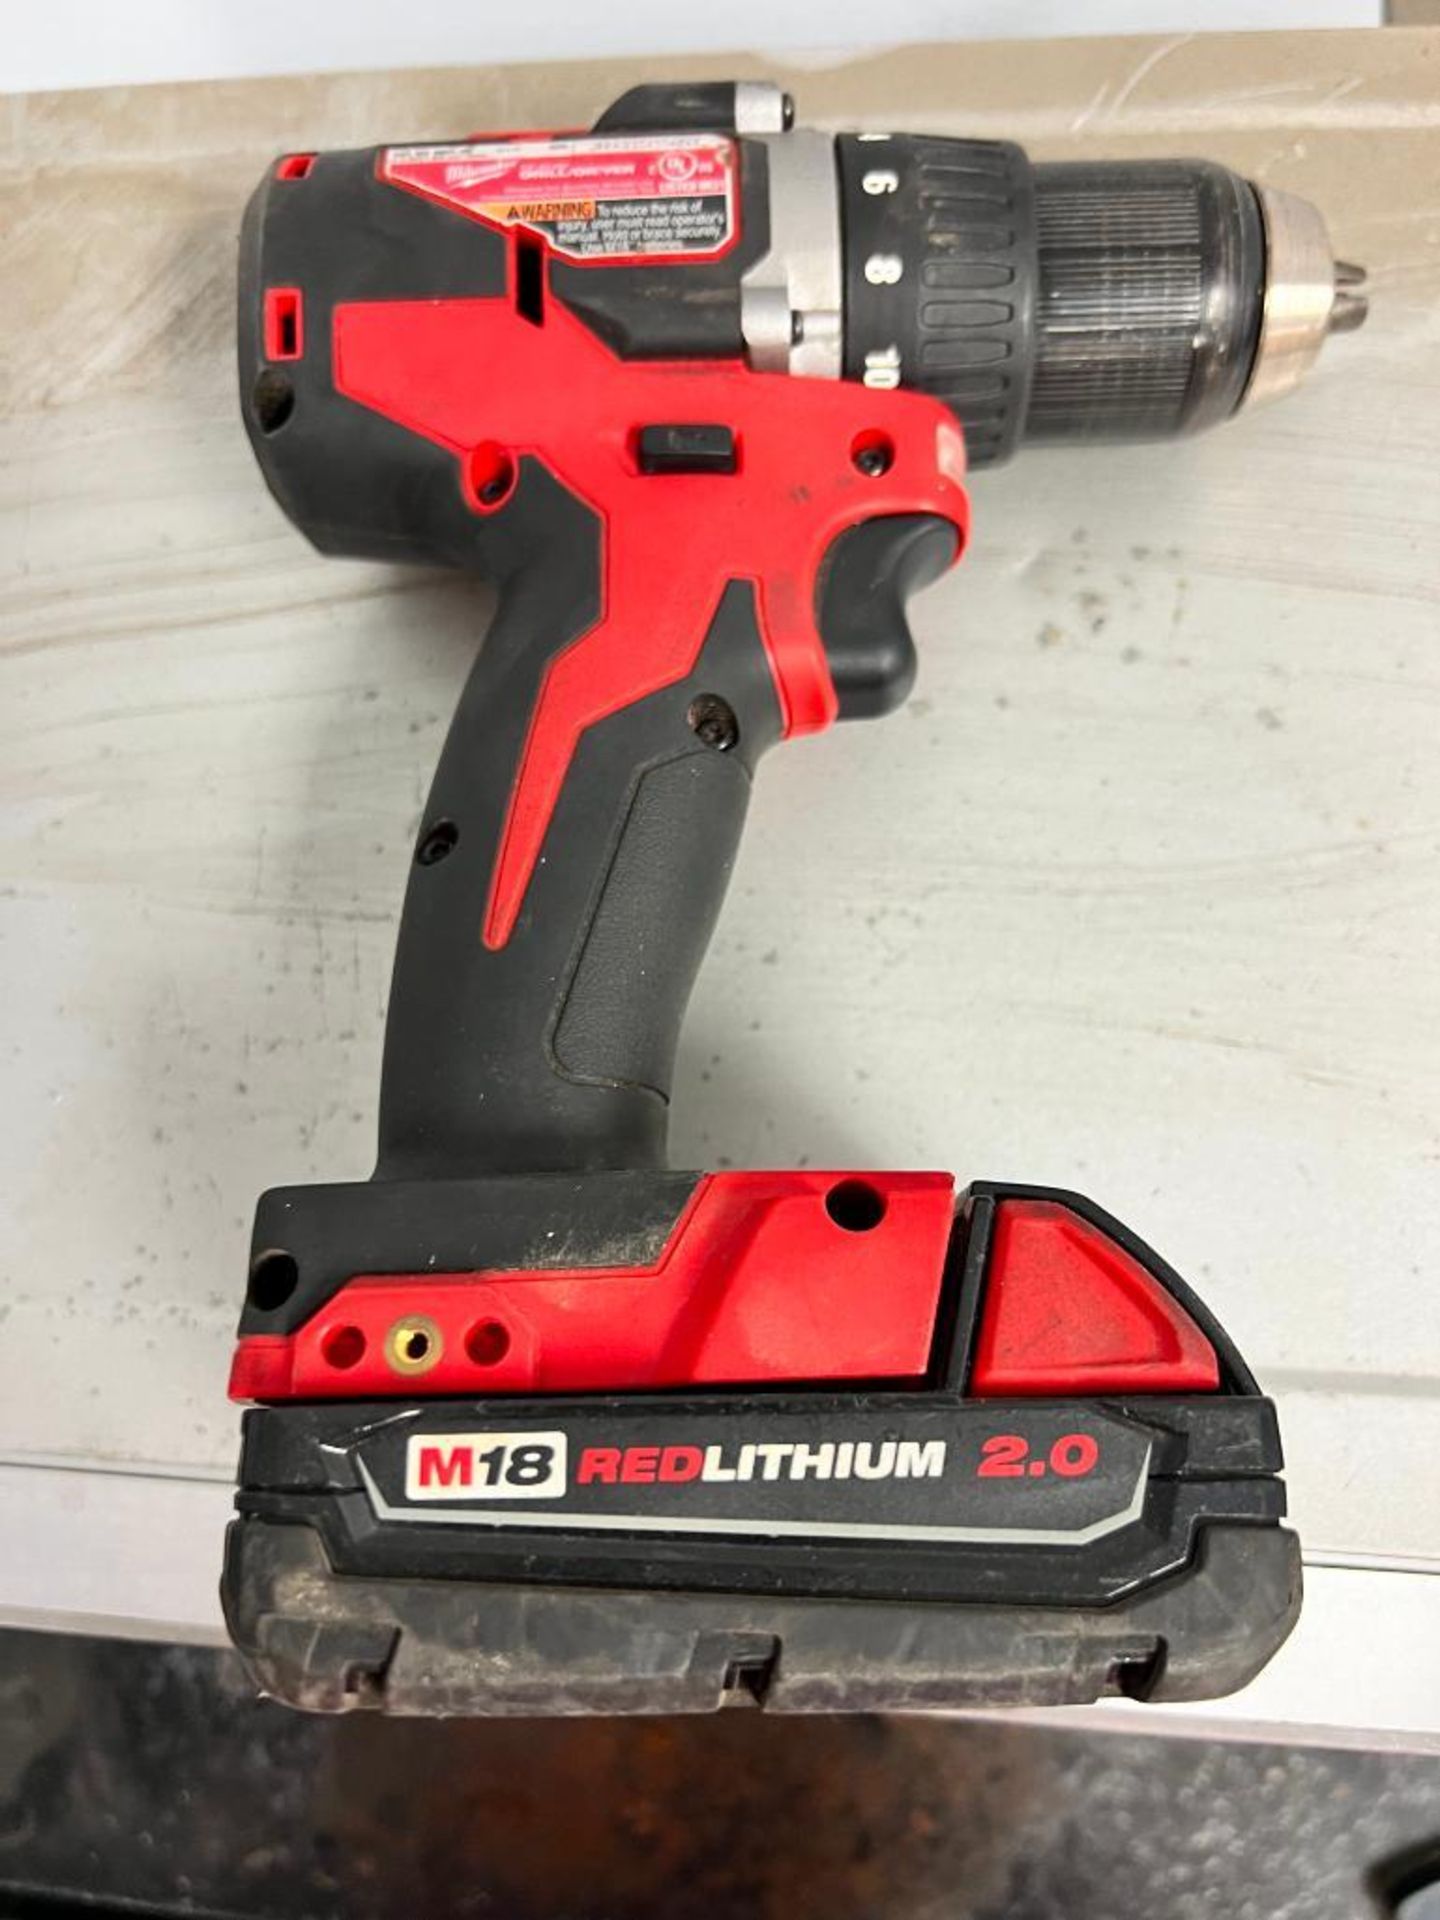 Milwaukee 18 Volt Cordless 1/2" Drill/Driver, S/N J86AG204004643, w/ Battery - Image 2 of 4